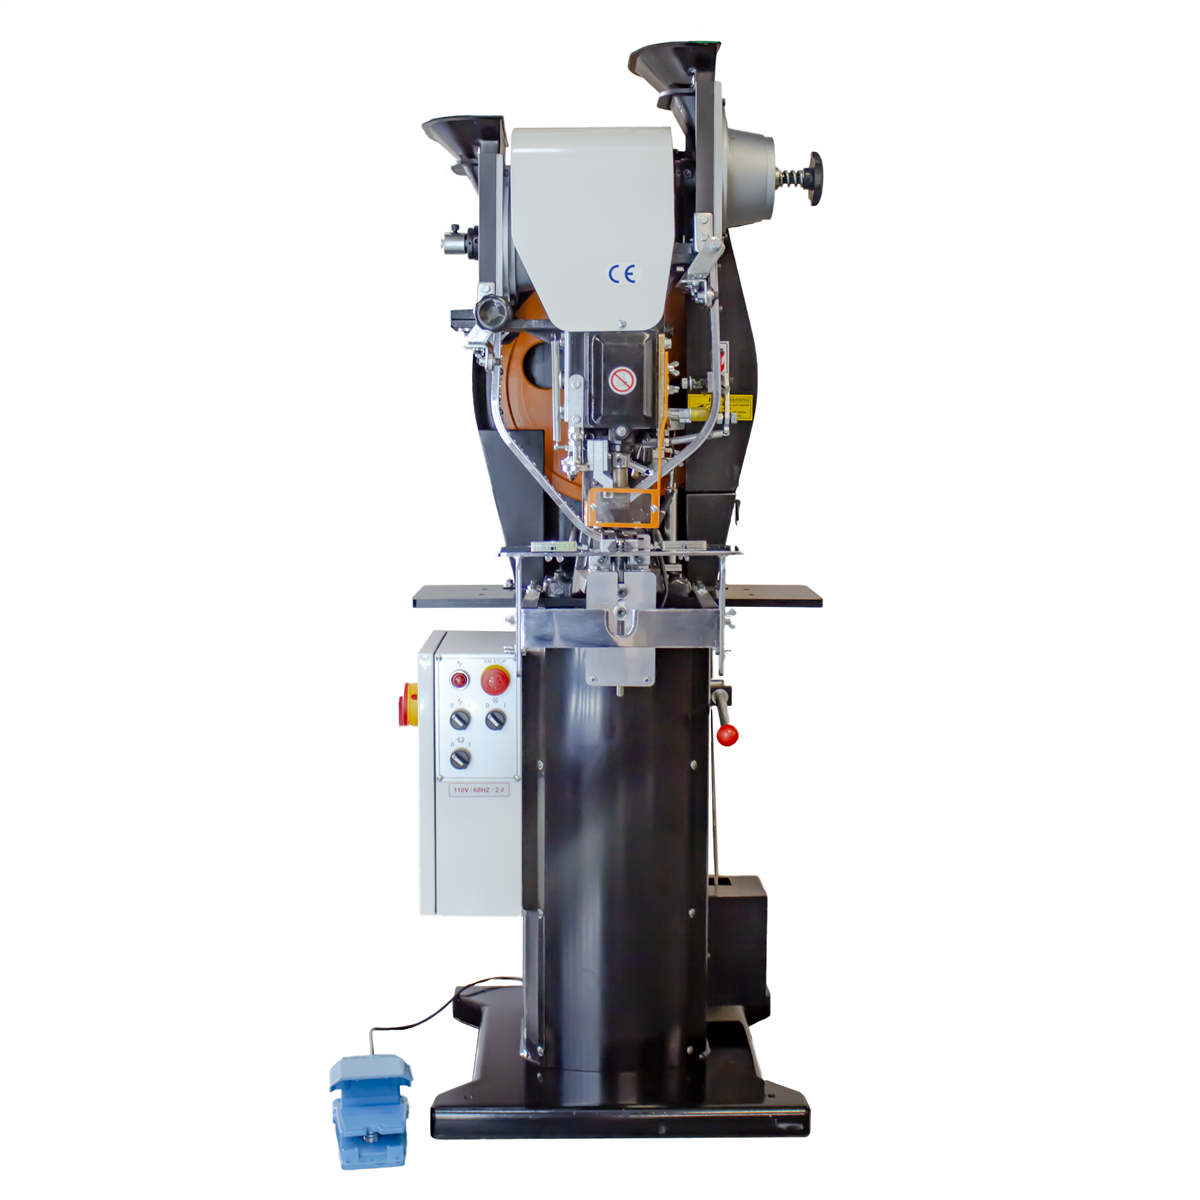 Get A Wholesale automatic kam snap press machine For Your Button